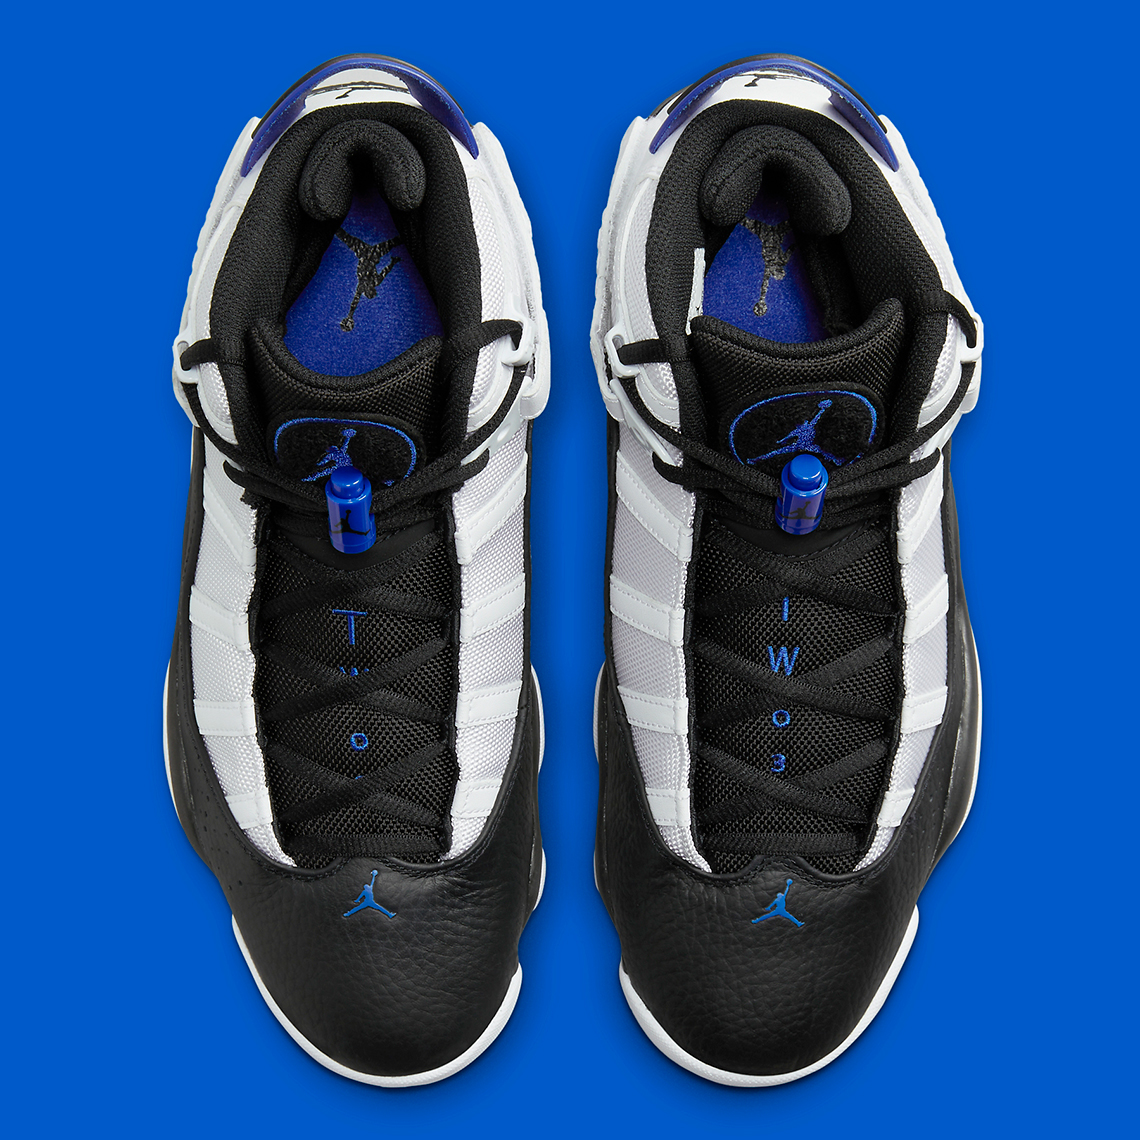 As Jordan Brand continues to expand on their upcoming Black White Game Royal 322992 142 3